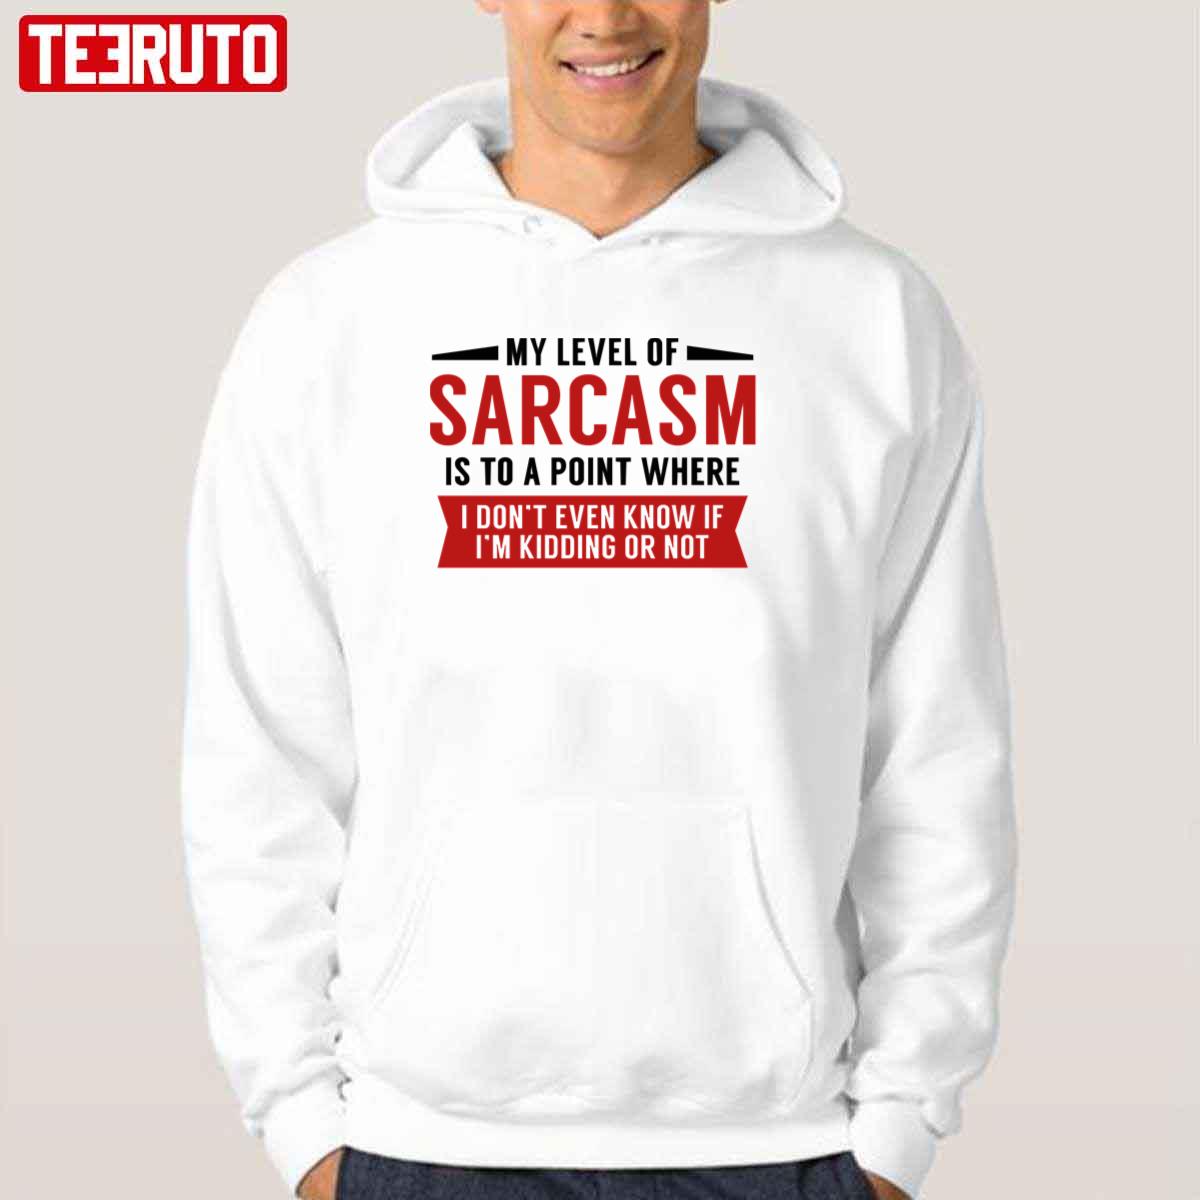 My Level Of Sarcasm Is To A Point Where I Don't Even Know If I'm Kidding Or Not Unisex T-Shirt